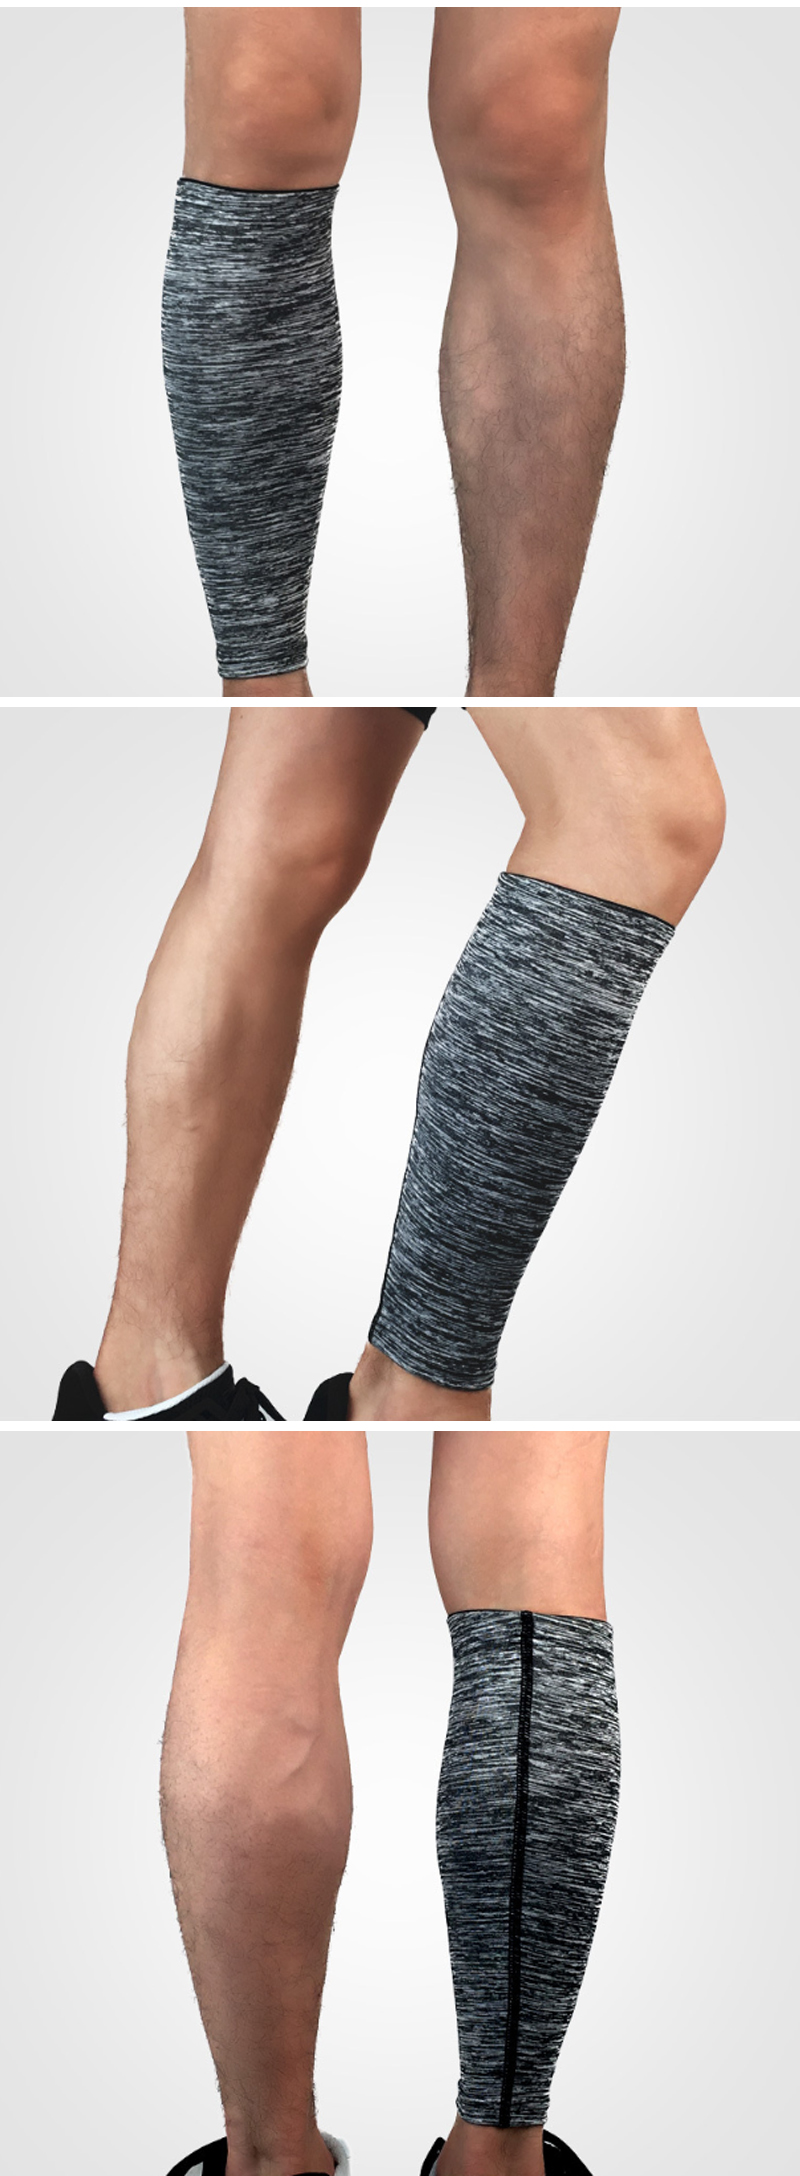 KALOAD-Leg-Support-Breathable-Calf-Foot-Protective-Sports-Cycling-Running-Fitness-Protective-Gear-1398532-2